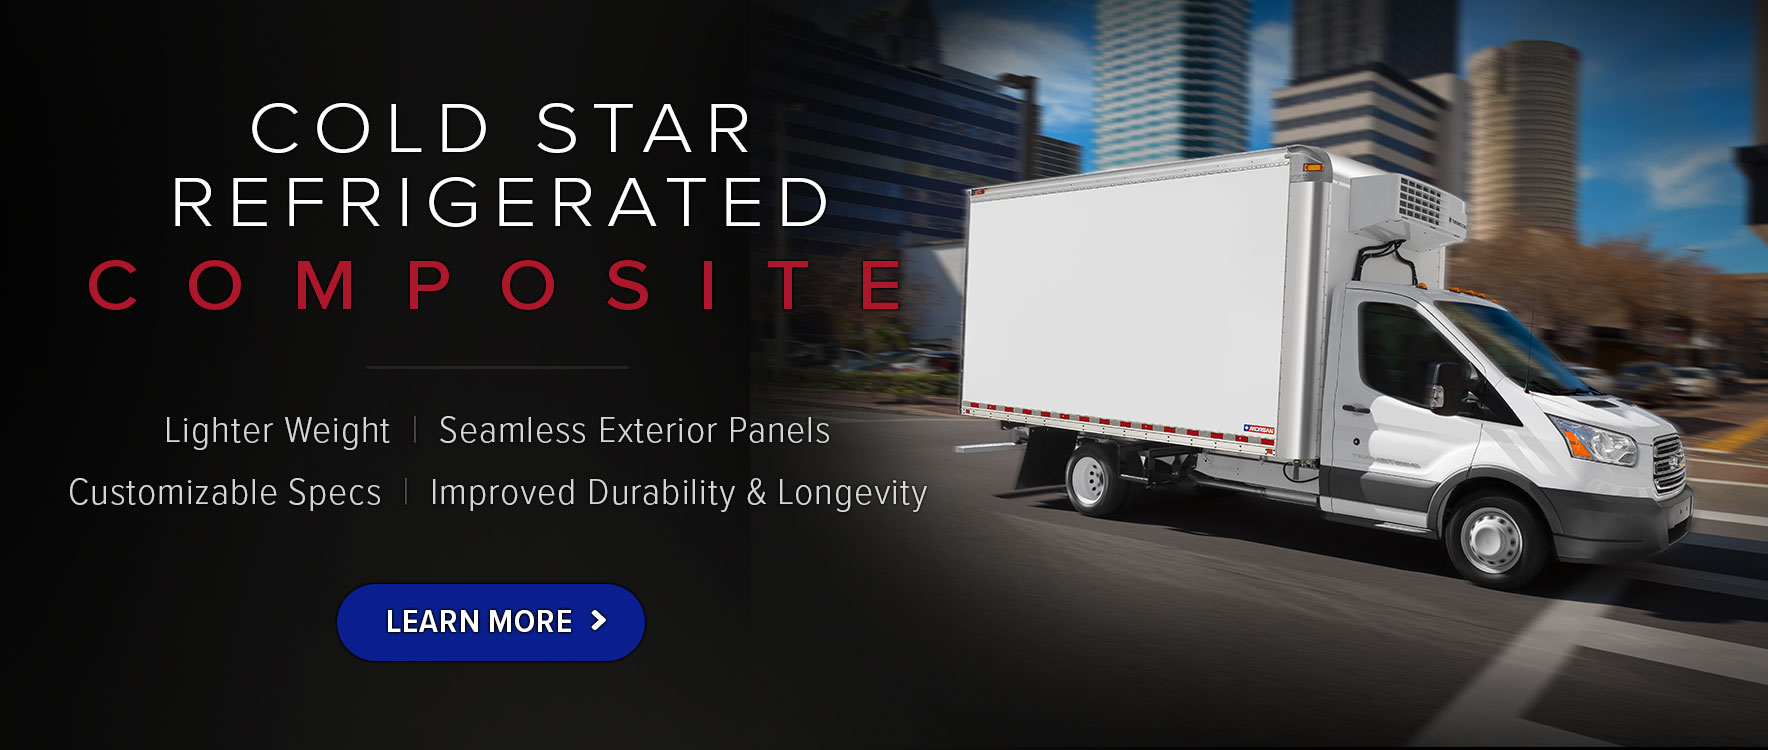 Cold Star Refrigerated Composite Truck Body